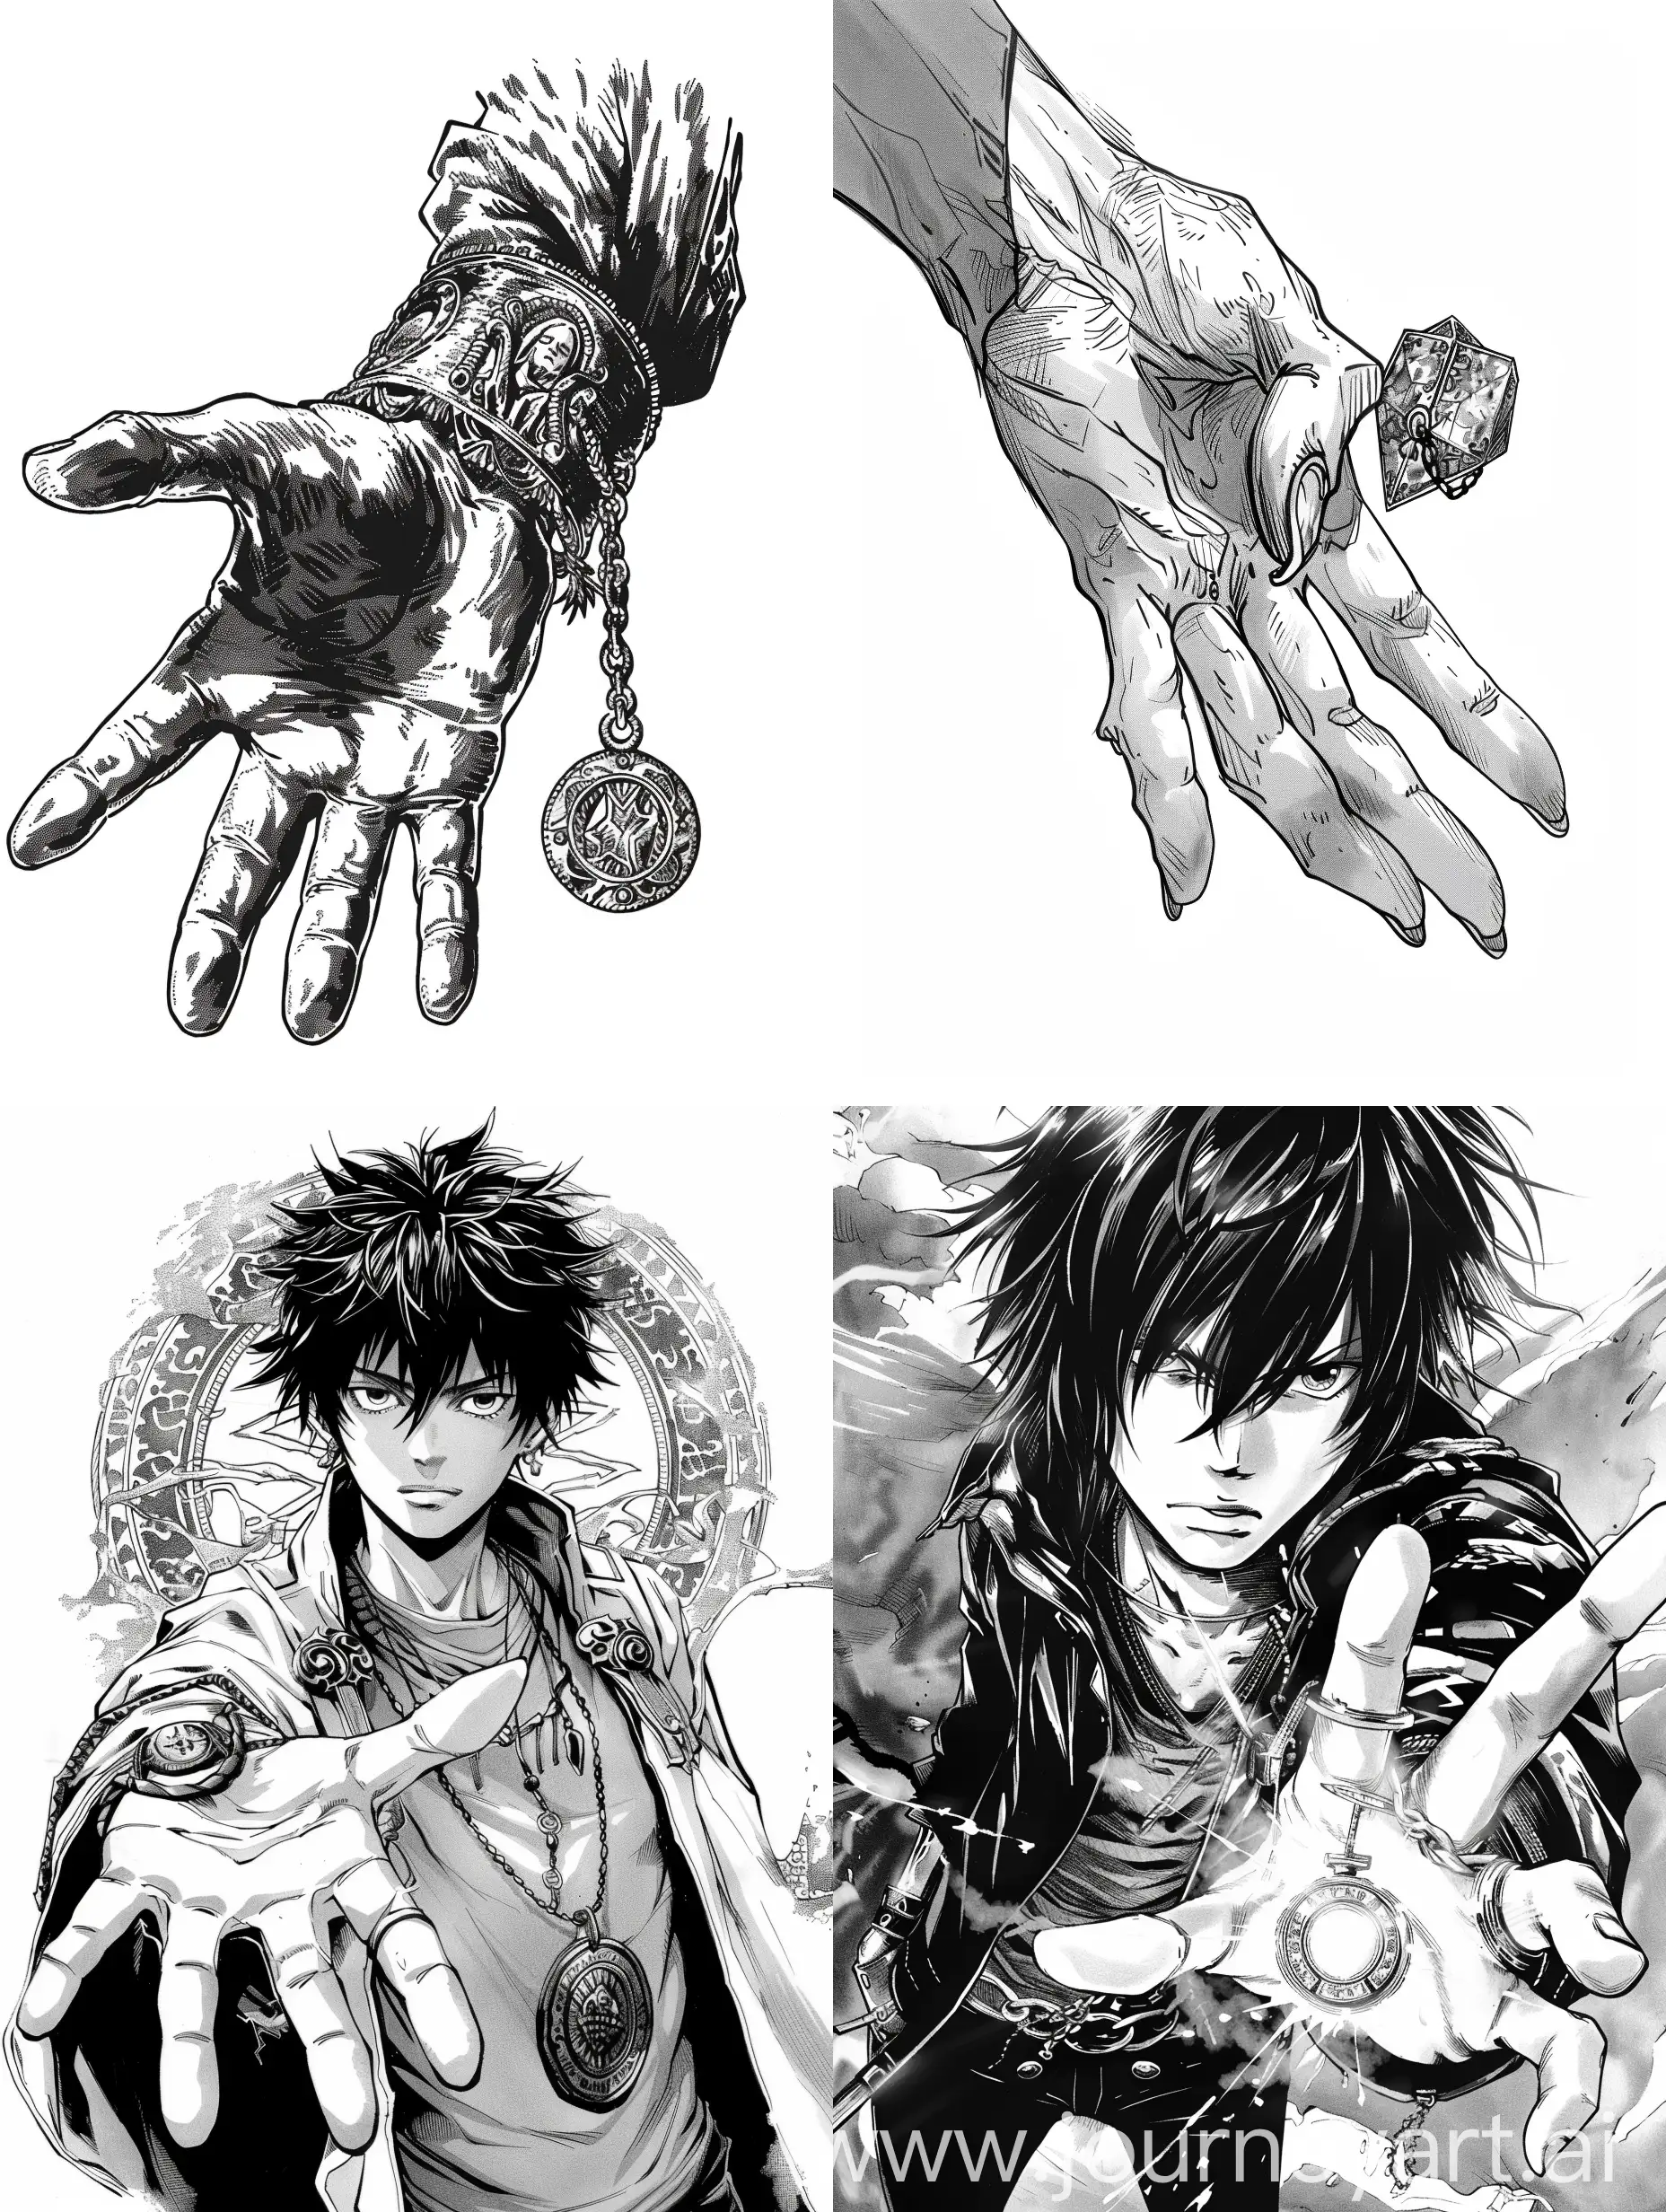 Manga-Style-Character-Holding-Amulet-in-Left-Hand